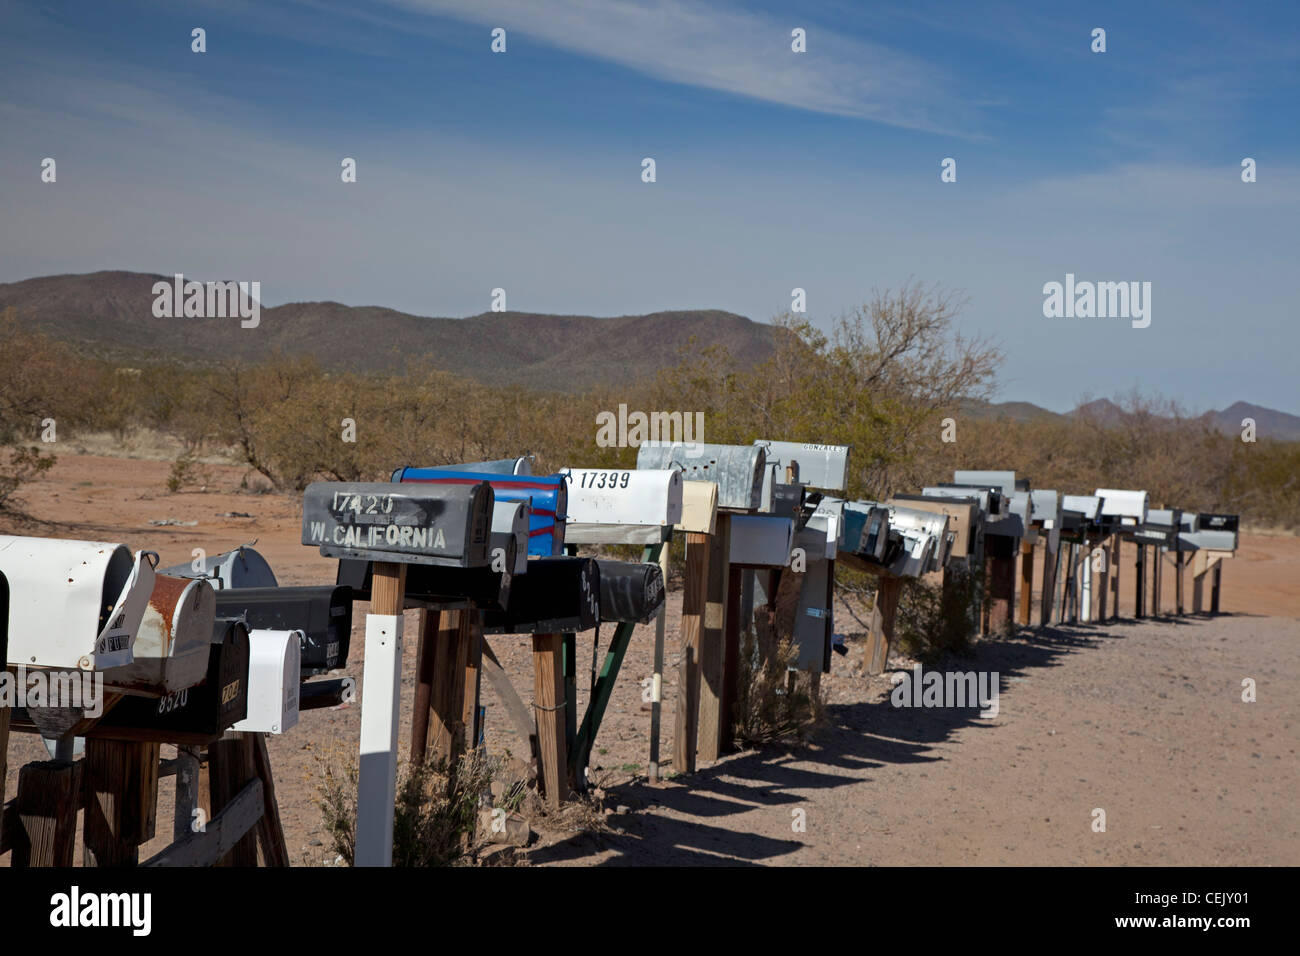 Three Pointes, Arizona - A long row of mailboxes are lined up along a dirt road in the desert west of Tucson. Stock Photo